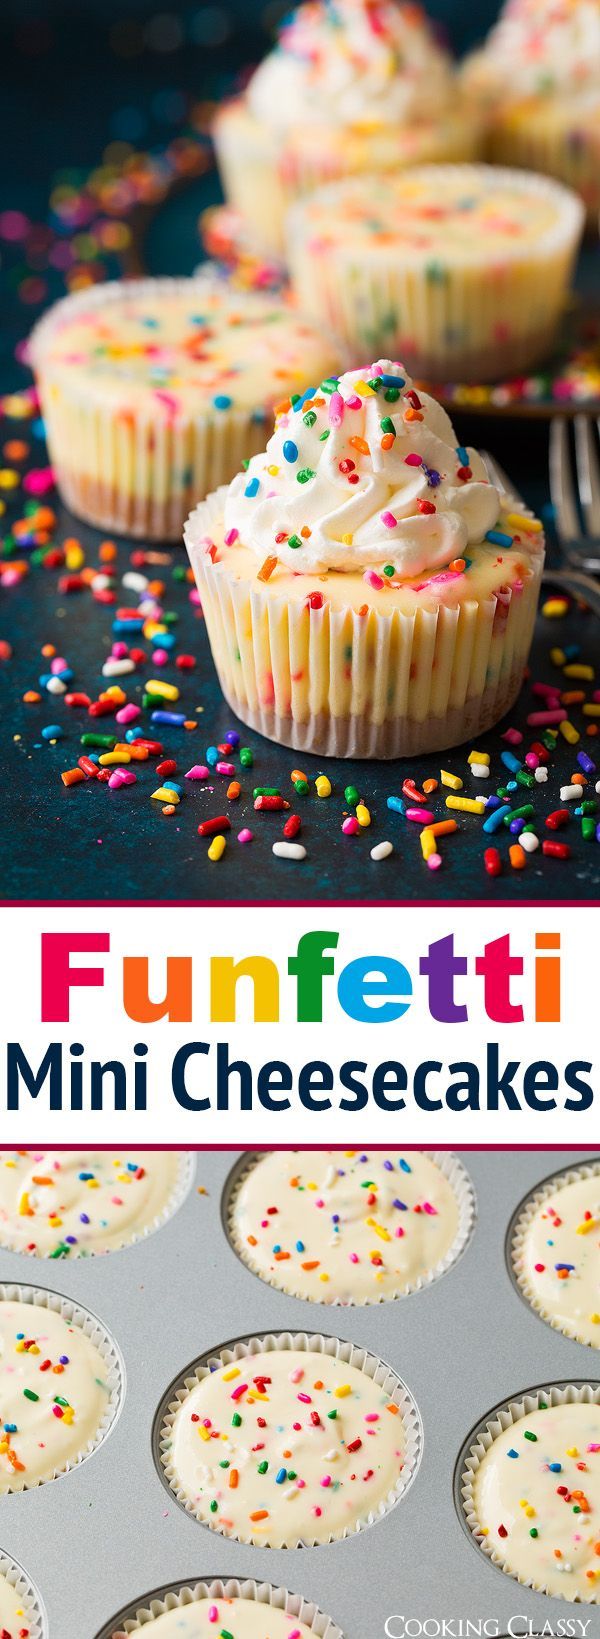 Funfetti Mini Cheesecakes – these are seriously delicious! Taste just like funfetti cake + the goodness of cheesecake.